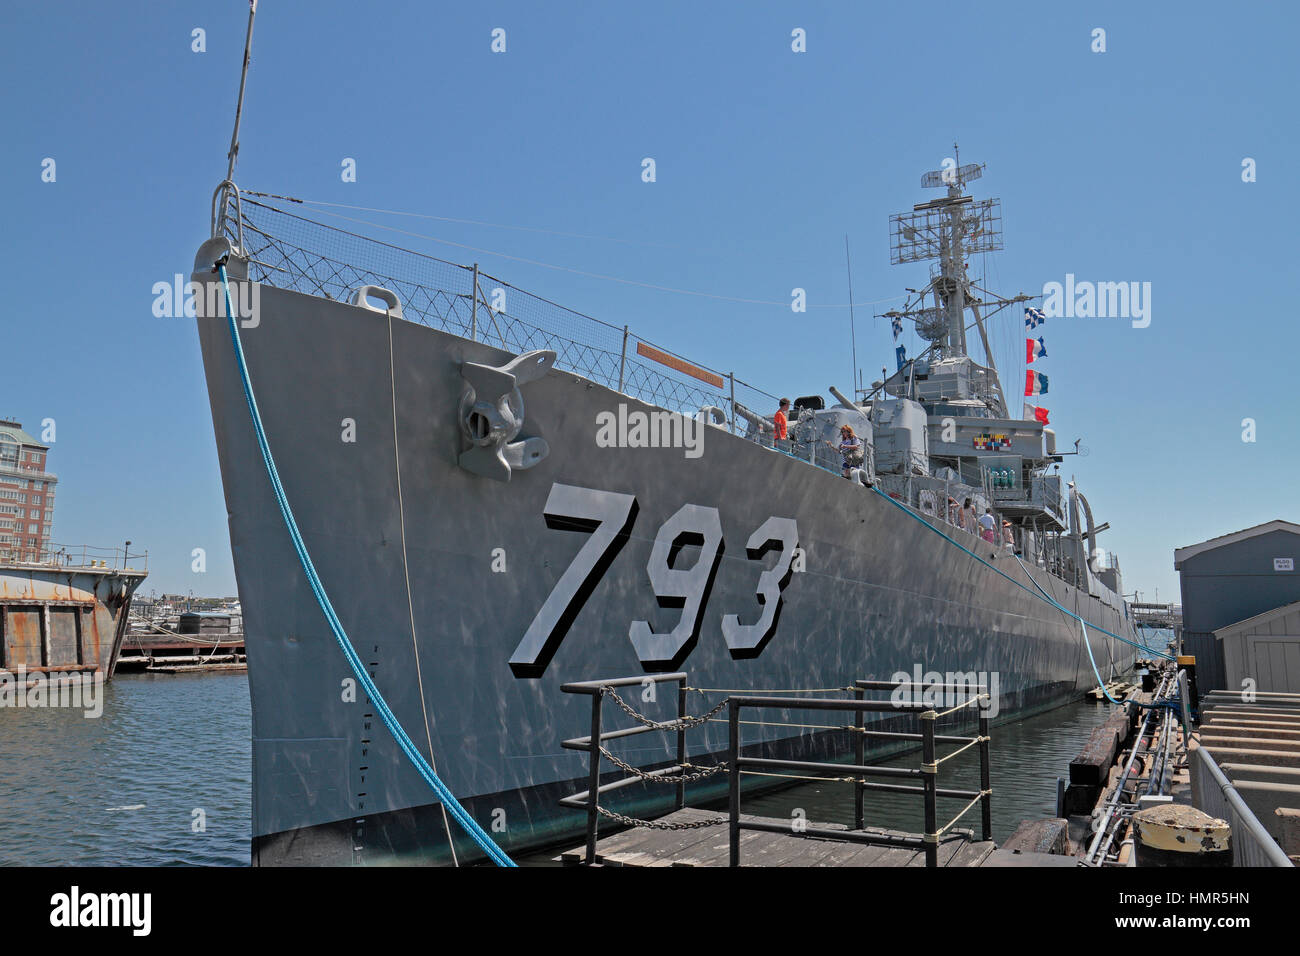 USS Cassin Young, Boston National Historical Park, Charlestown Navy Yard, Boston, Massachusetts, United States. Banque D'Images